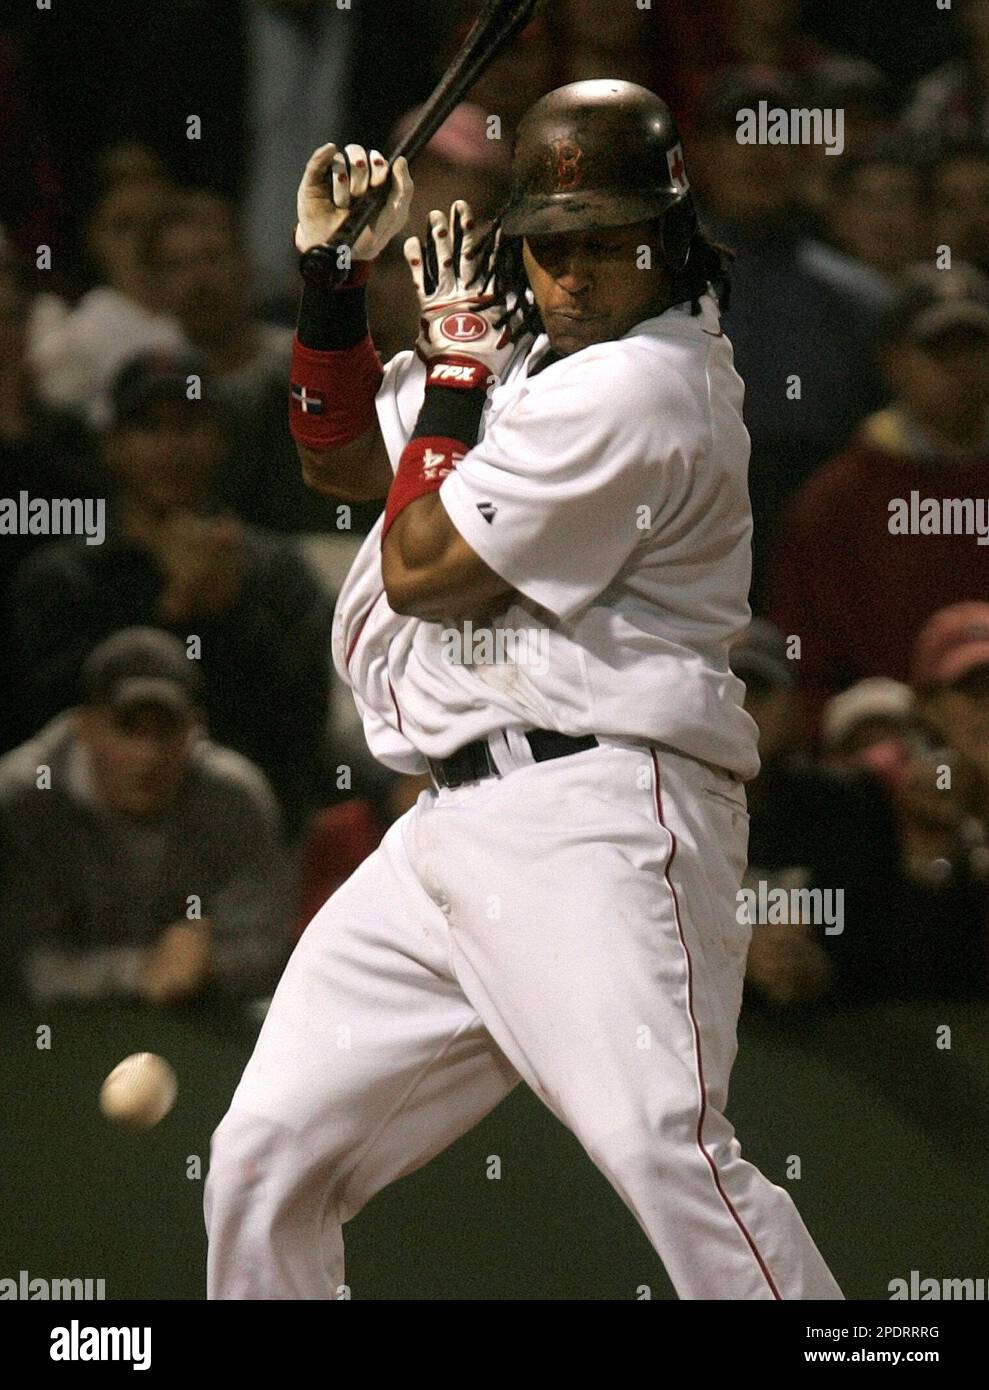 Boston Red Sox' Manny Ramirez is hit by a pitch with bases loaded in the  bottom of the 10th inning by Oakland Athletics pitcher Keiichi Yabu at  Fenway Park in Boston, Friday